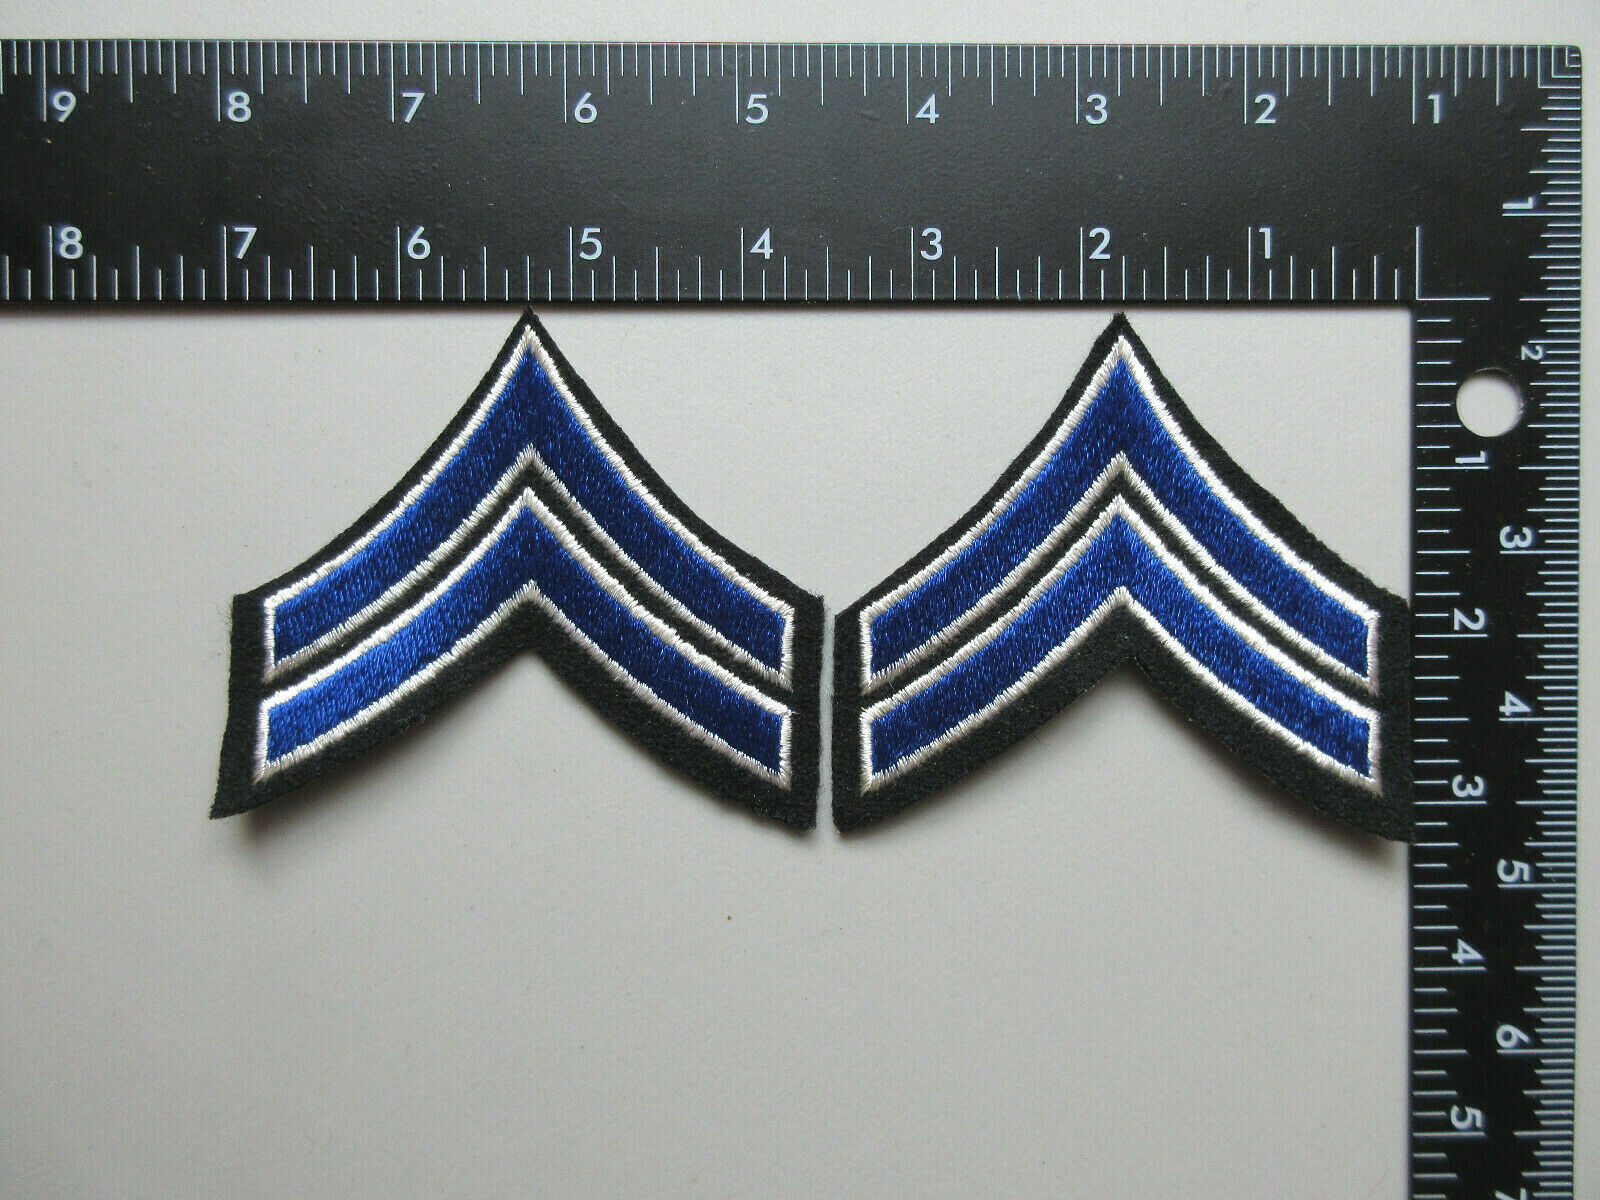 CORPORAL MILITARY SECURITY OFFICER RANK STRIPES PATCHES (BLUE / WHITE / BLACK)